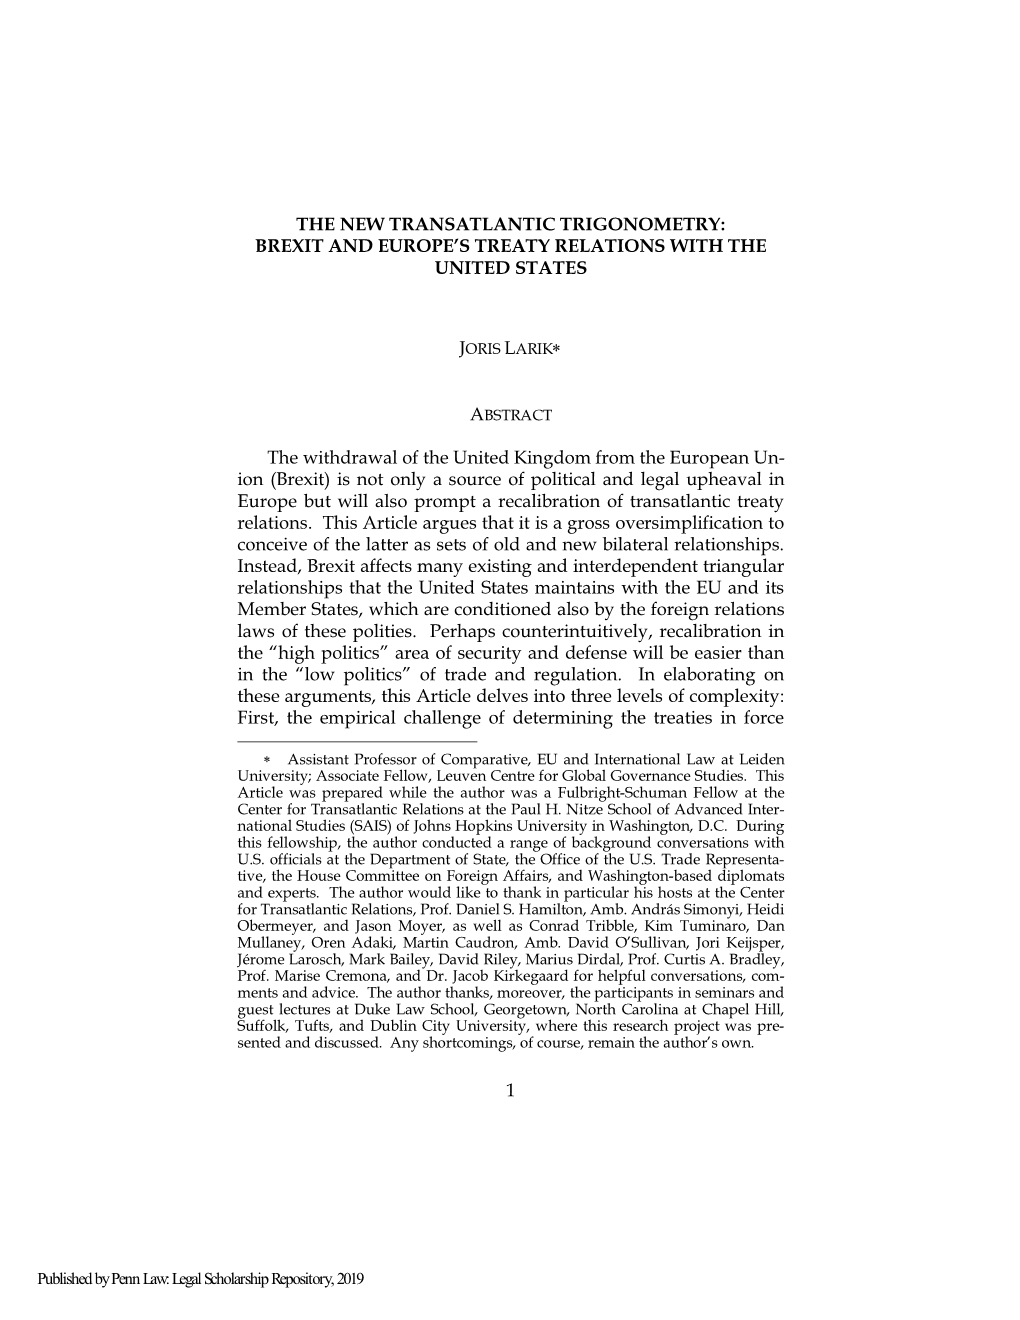 Brexit and Europeâ•Žs Treaty Relations with the United States